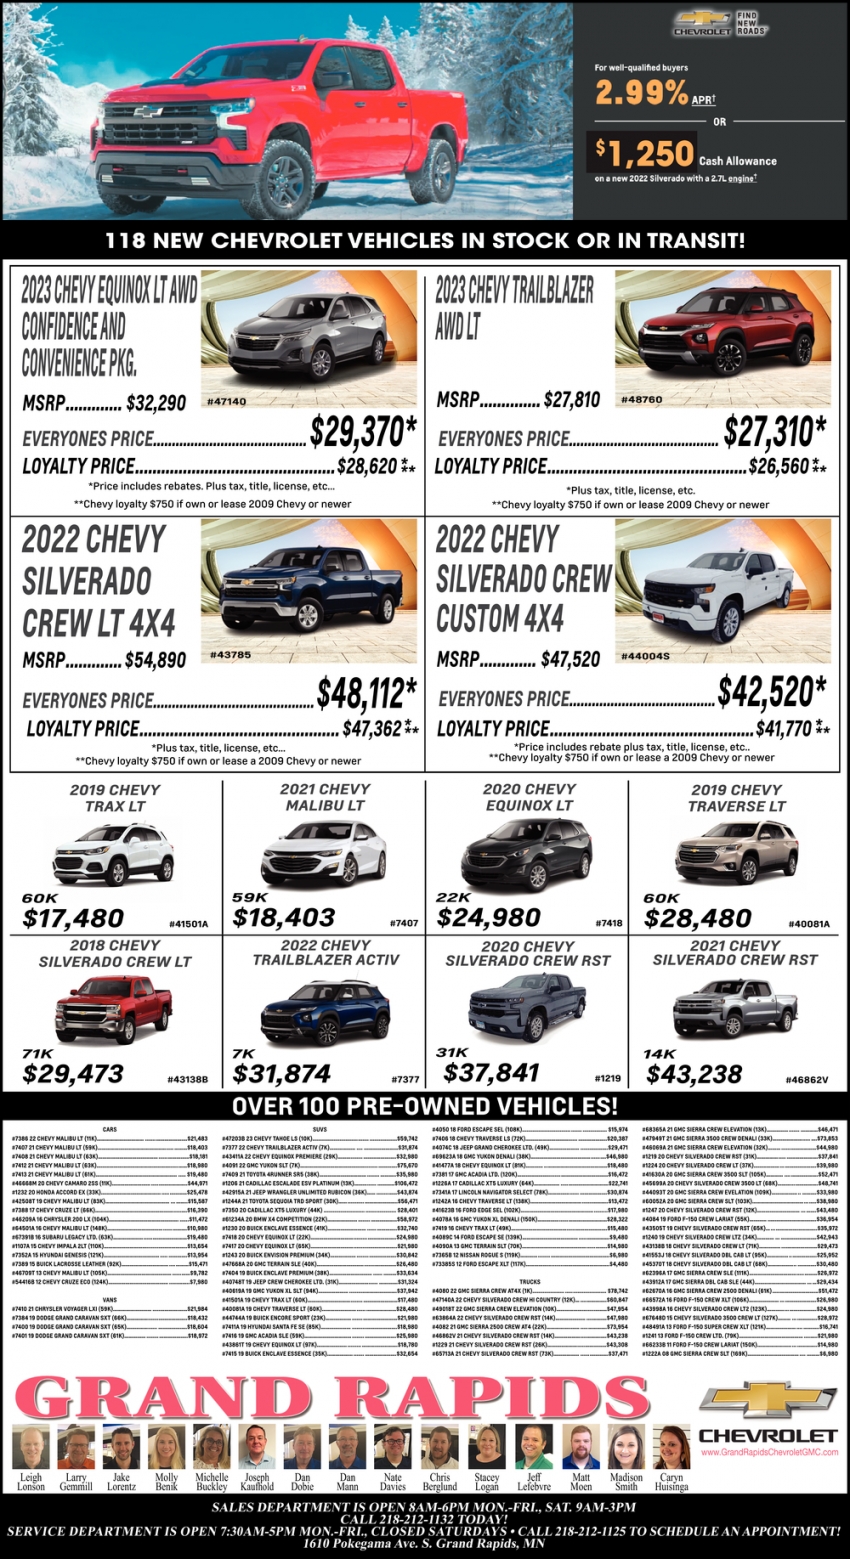 118 New Chevrolet Vehicles In Stock Or In Transit!